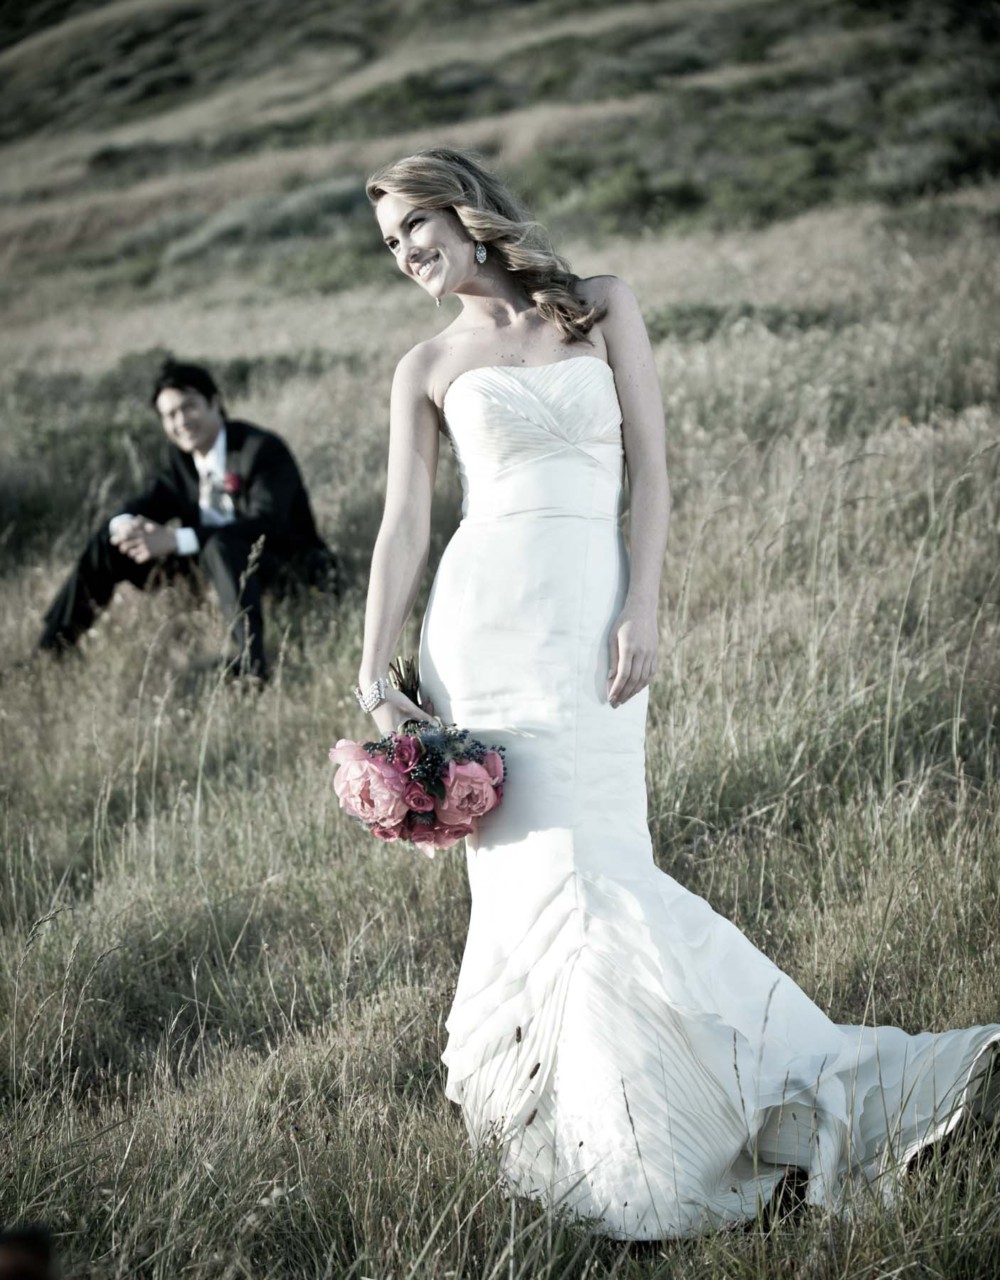 Looking for a top wedding photographer in Anchorage?